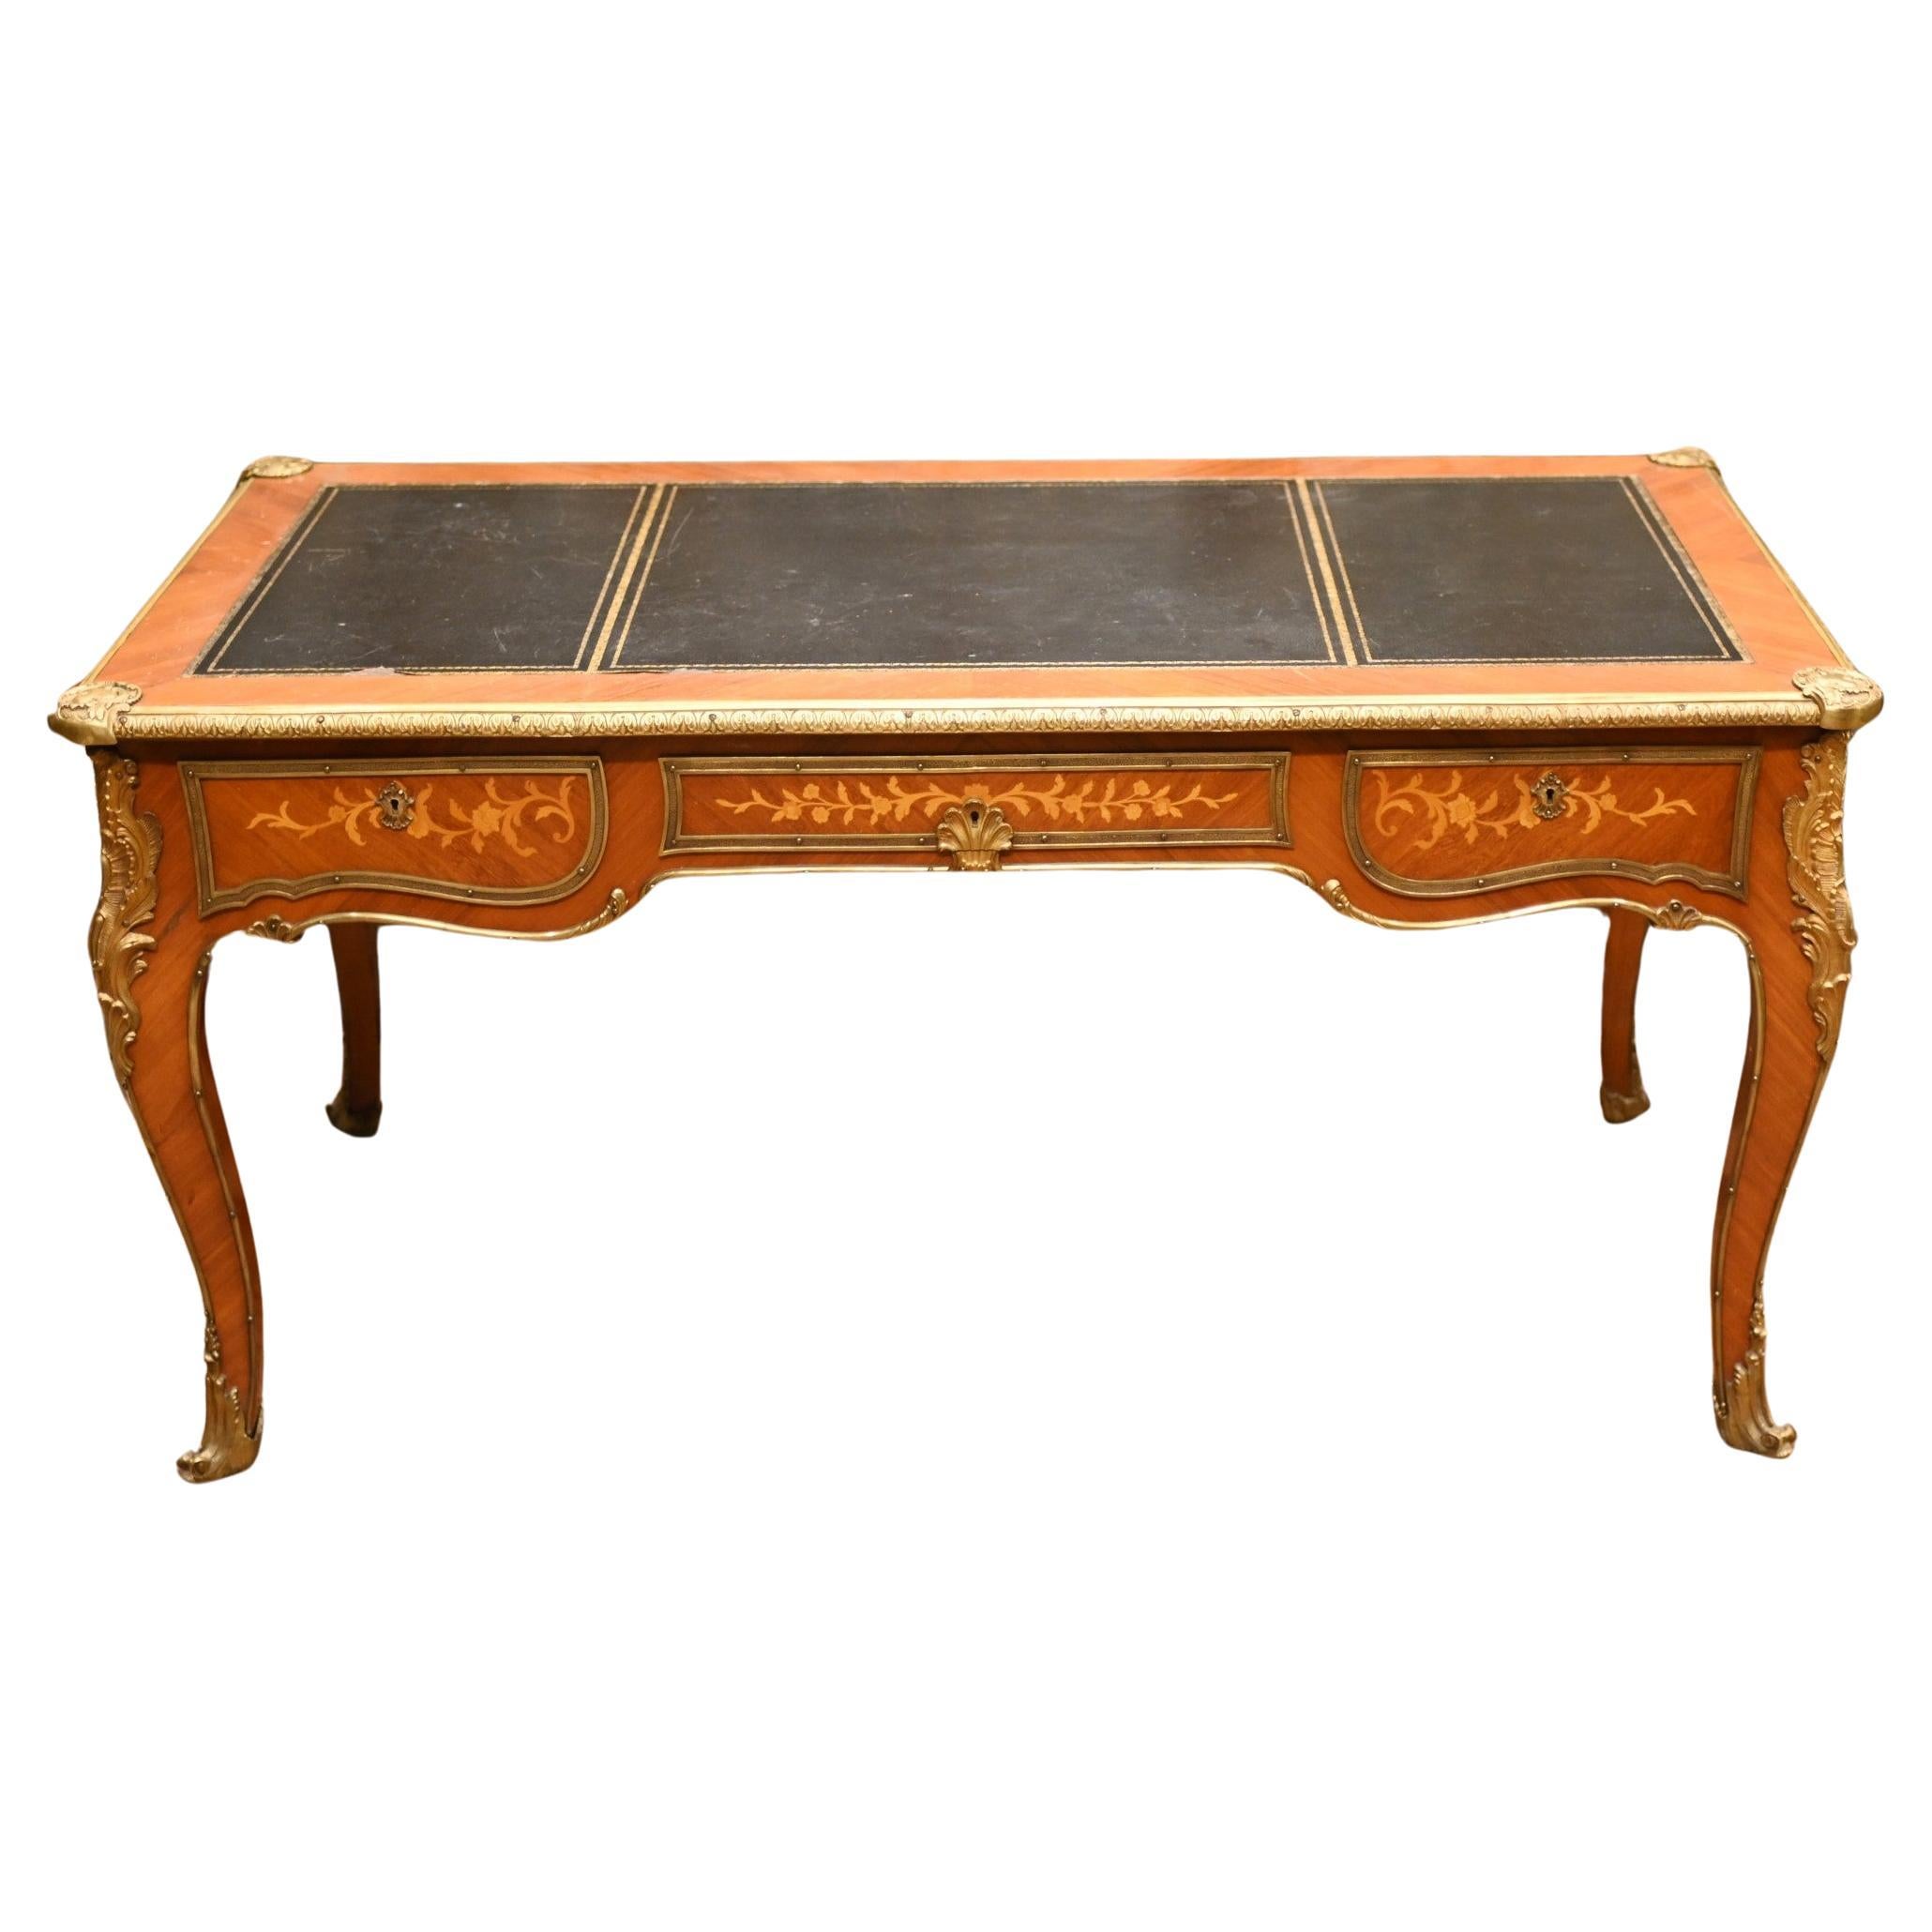 Antique Bureau Plat French Inlay Desk Writing Table